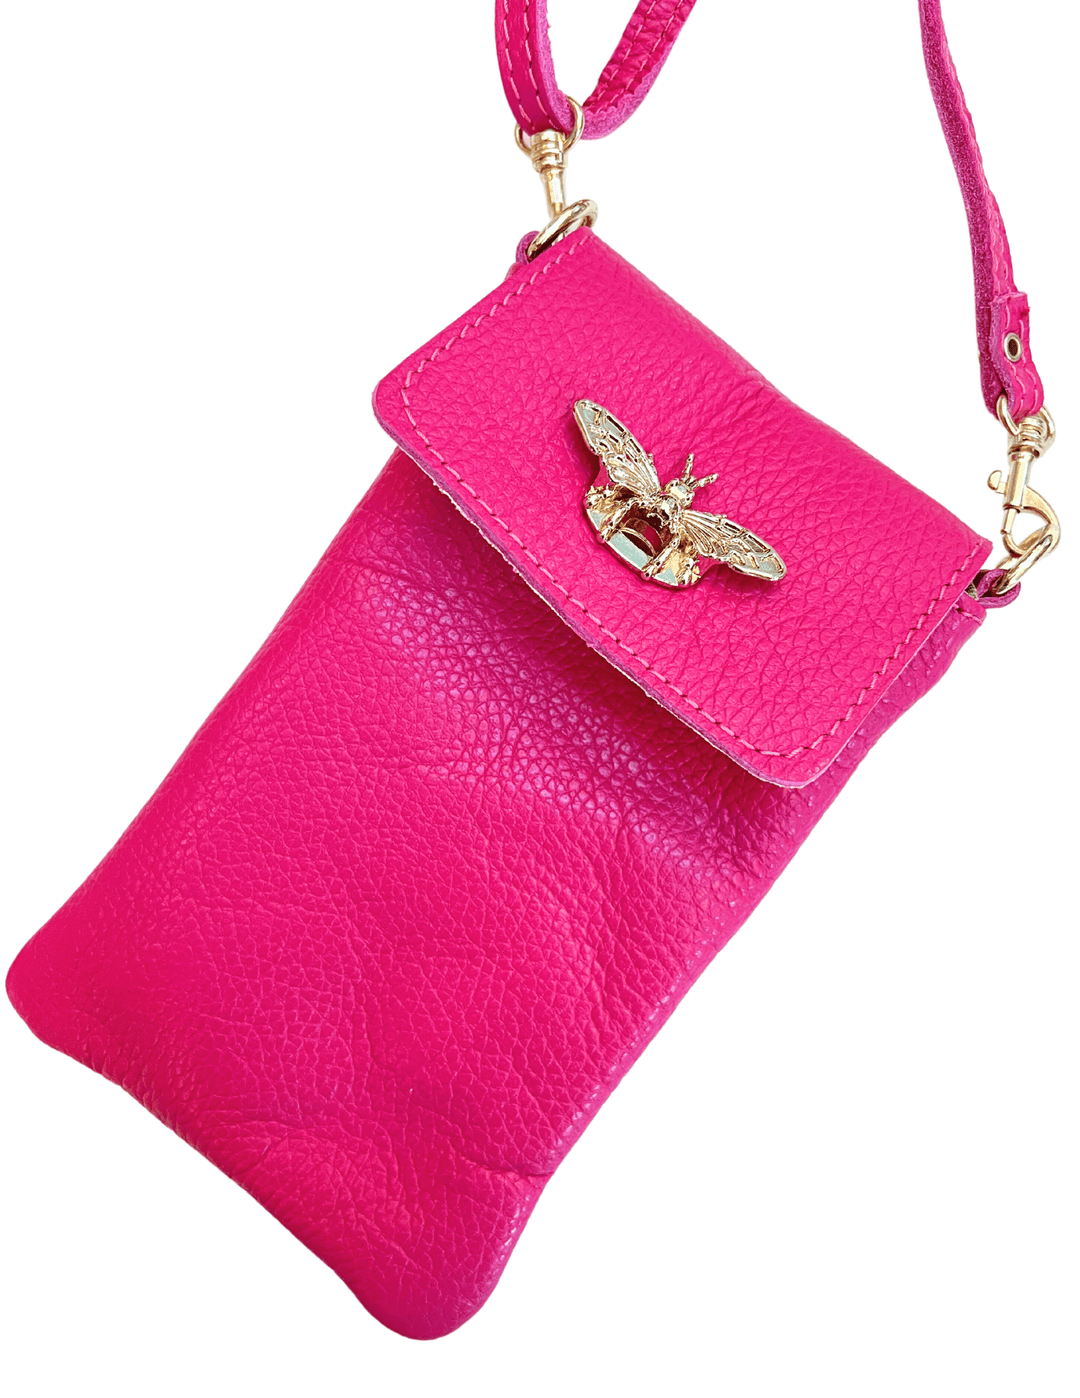 gift boutique near me for women leather phone bee bag pink